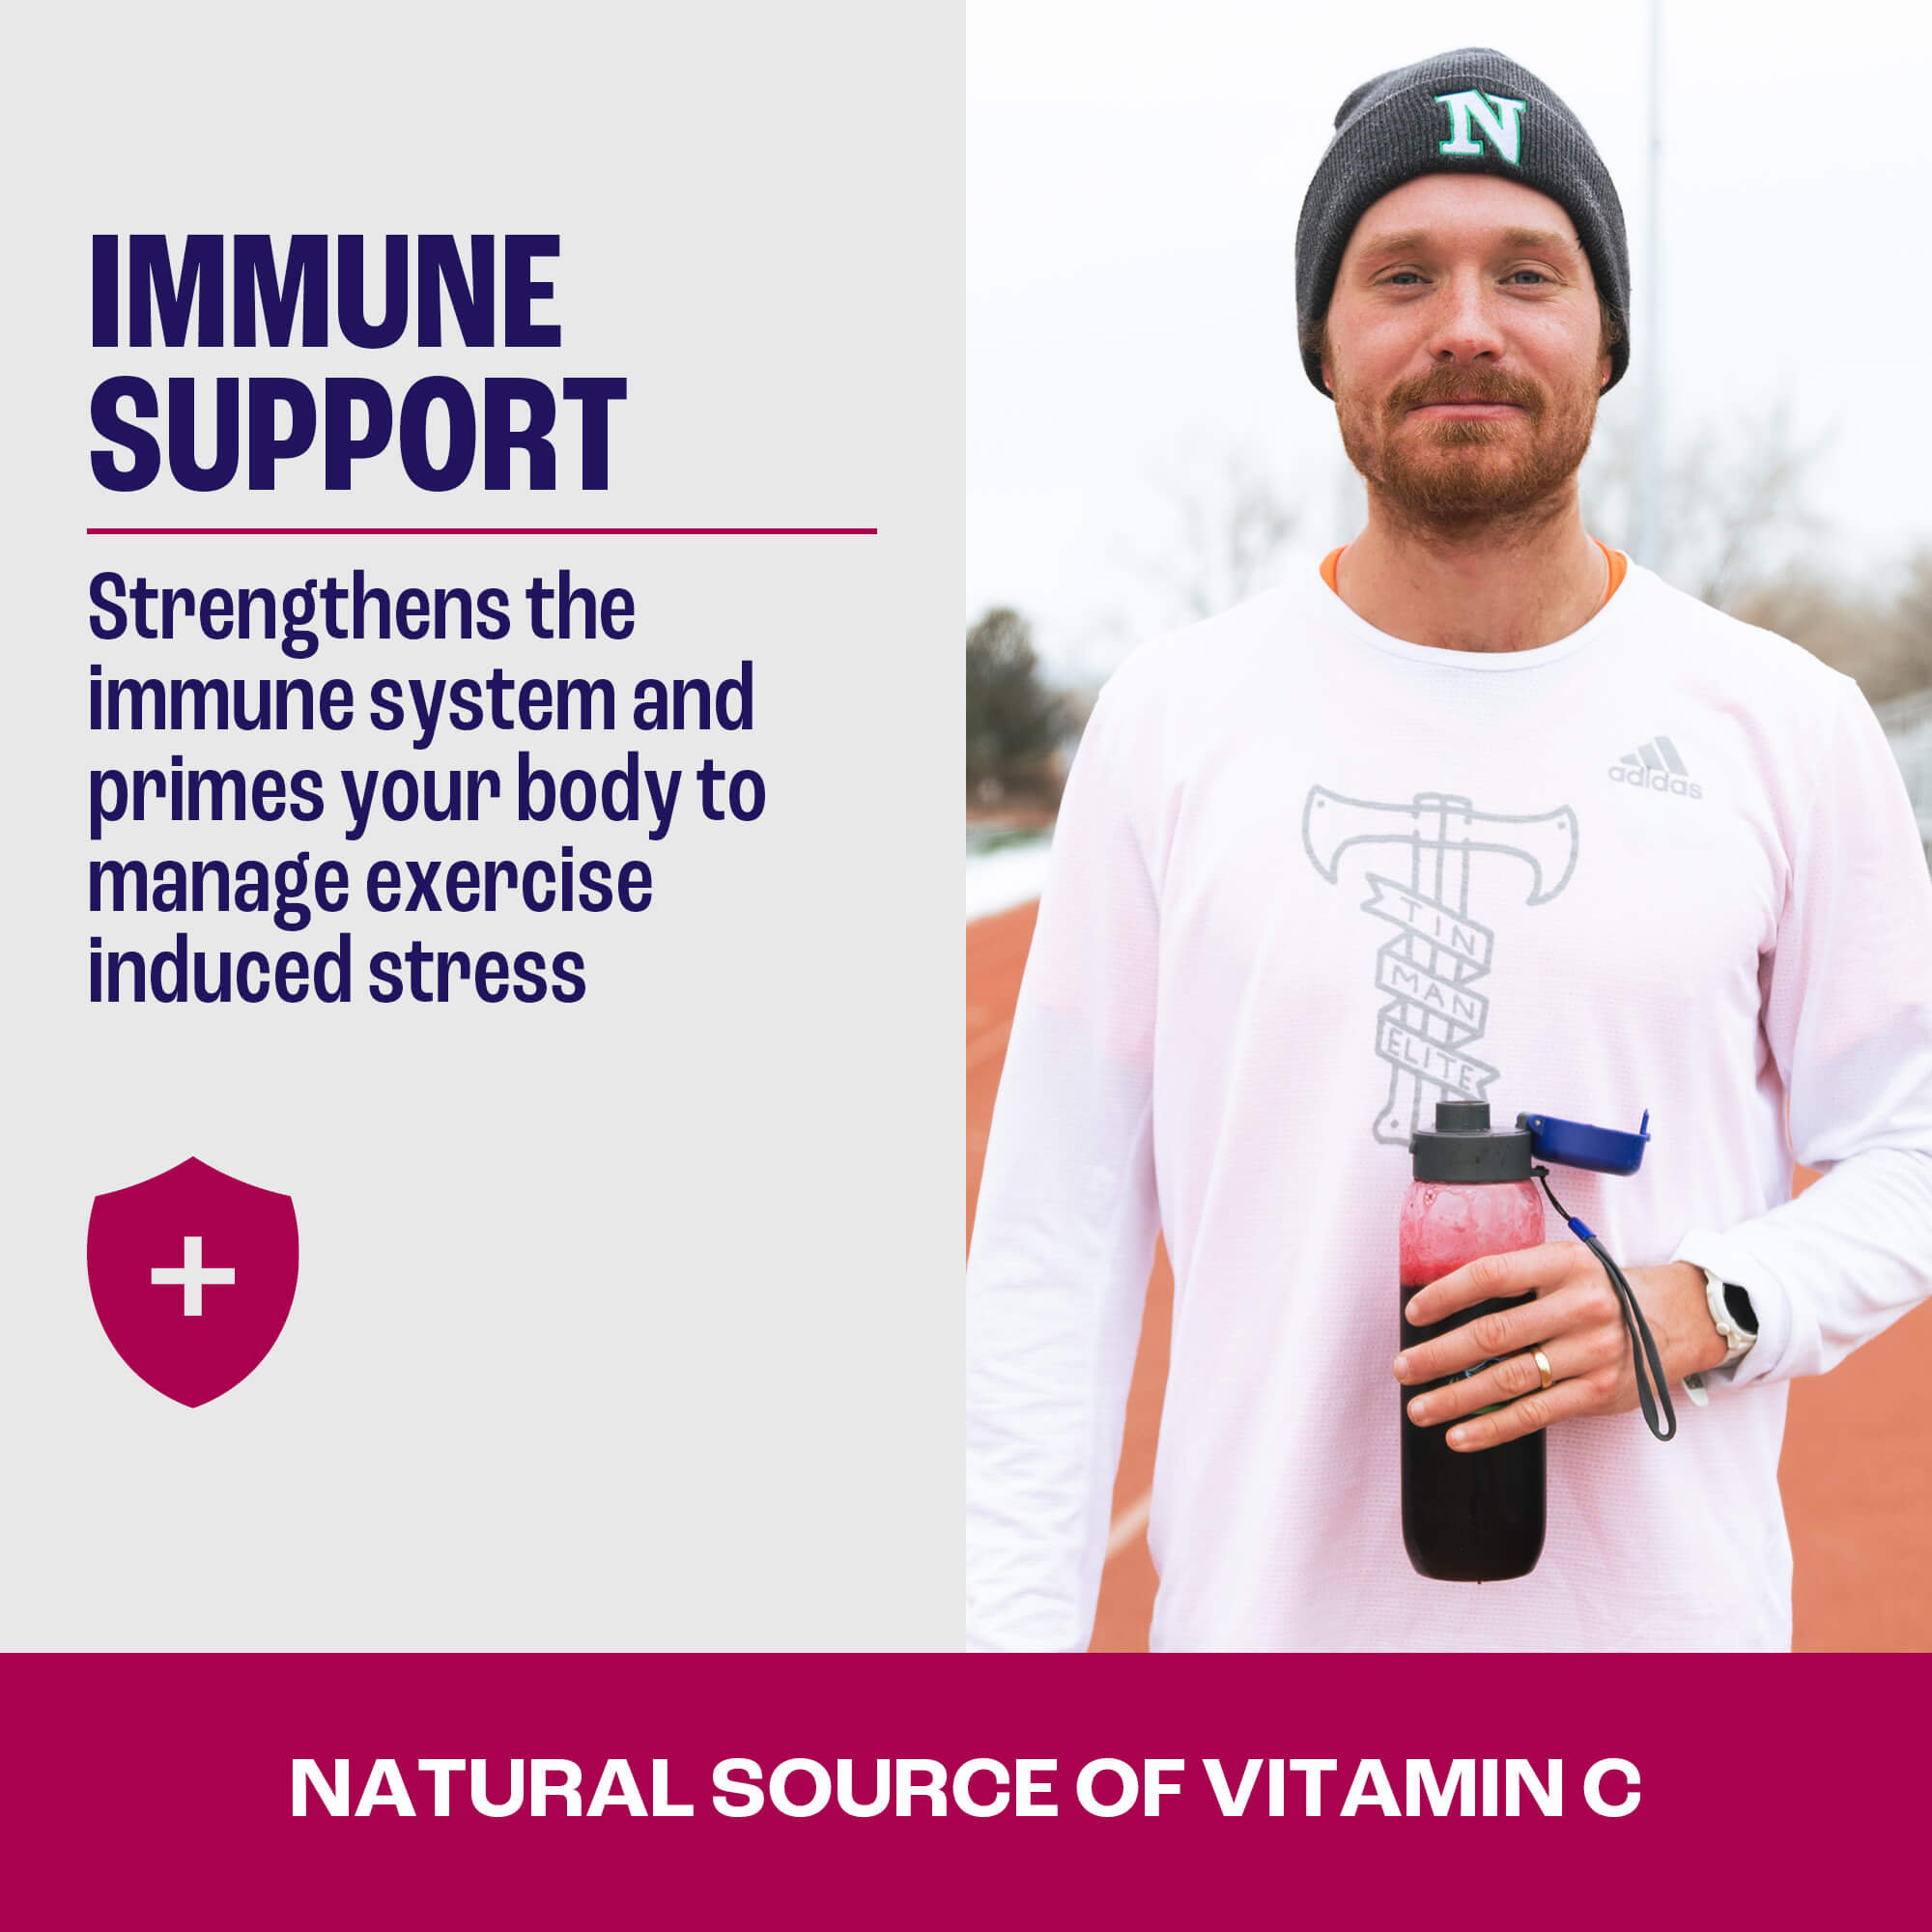 Immune support with natural vitamin c from 2before blackcurrant powder pre-workout